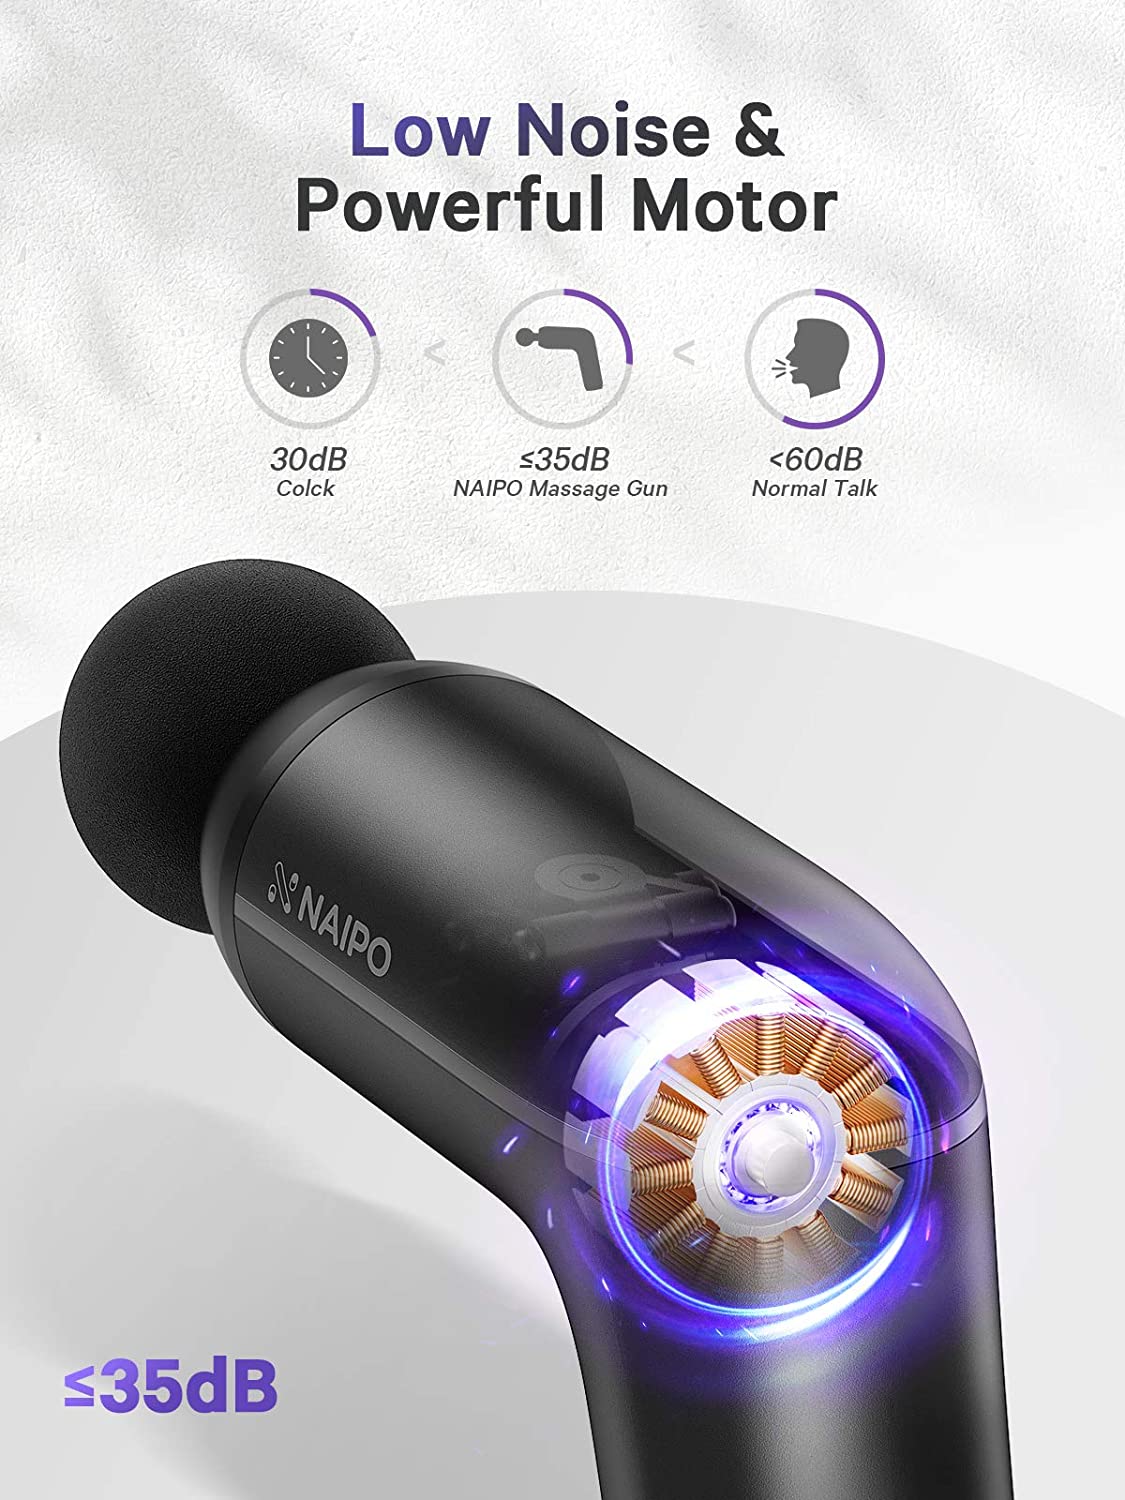 Load image into Gallery viewer, Naipo Massage Gun for Athletes, Deep Tissue Handheld Massage Professional Percussion Body Muscle Massage Gun for Pain Relief Relaxation with 5 Massage Heads Cordless Quiet Portable Carrying Case - NAIPO
